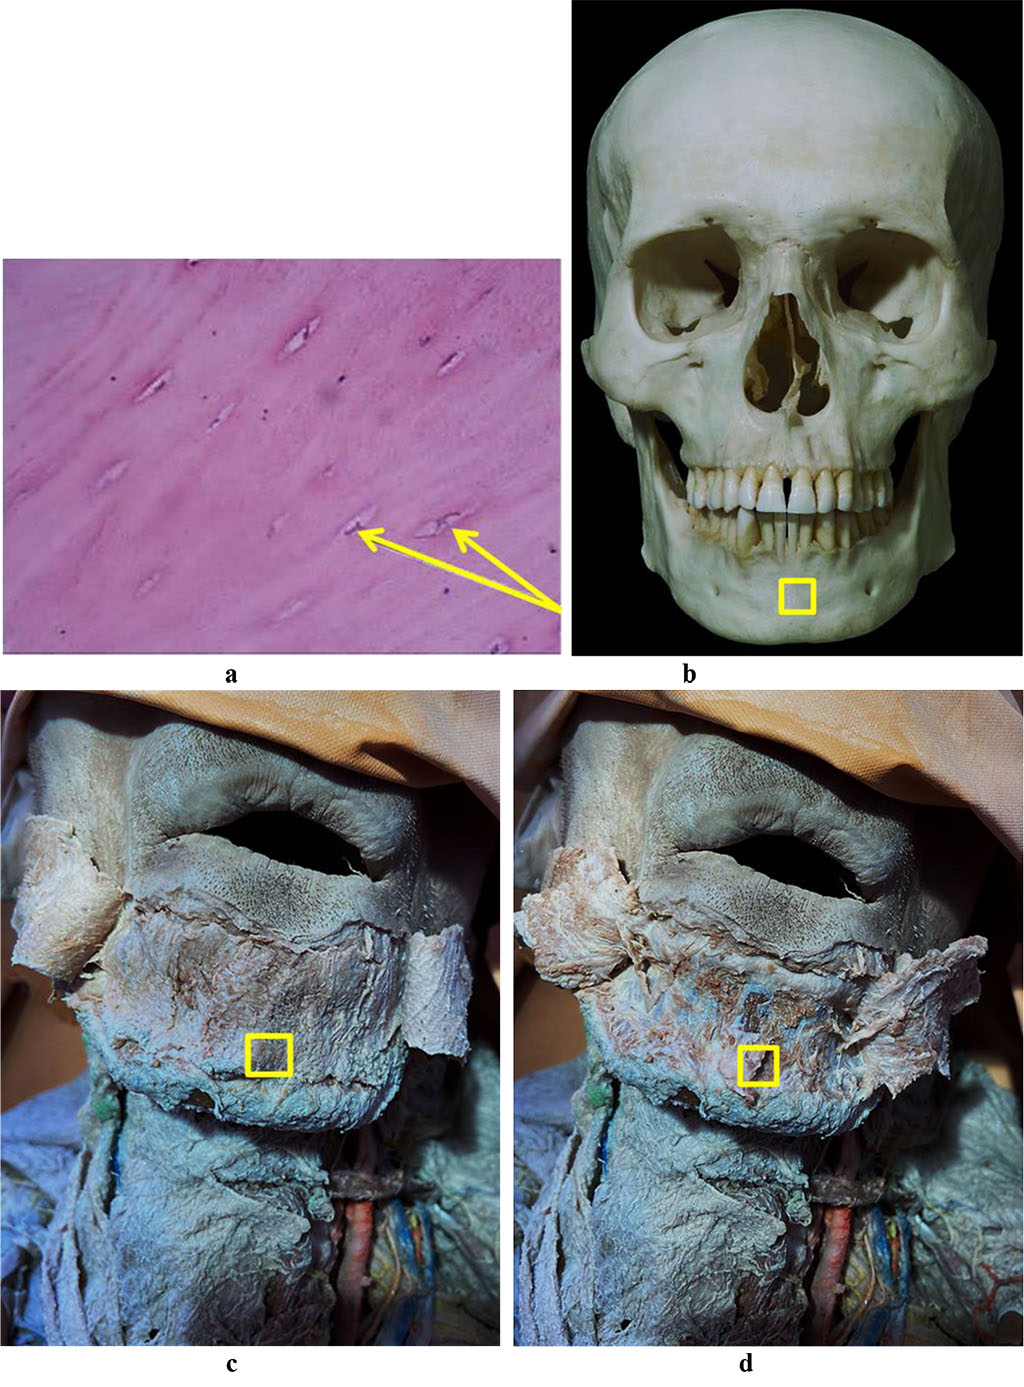 Figure 4. Bone biopsy taken from the chin symphysis area: a – a histological preparation of intact bone from the chin symphysis area (×400, hematoxylin-eosin staining; osteocytes indicated by arrows); b – a section of the mandible donor zone to obtain a chin autograft; c – an anatomical preparation after the skin flap detachment; d – an anatomical preparation after the muco-periosteal flap detachment.